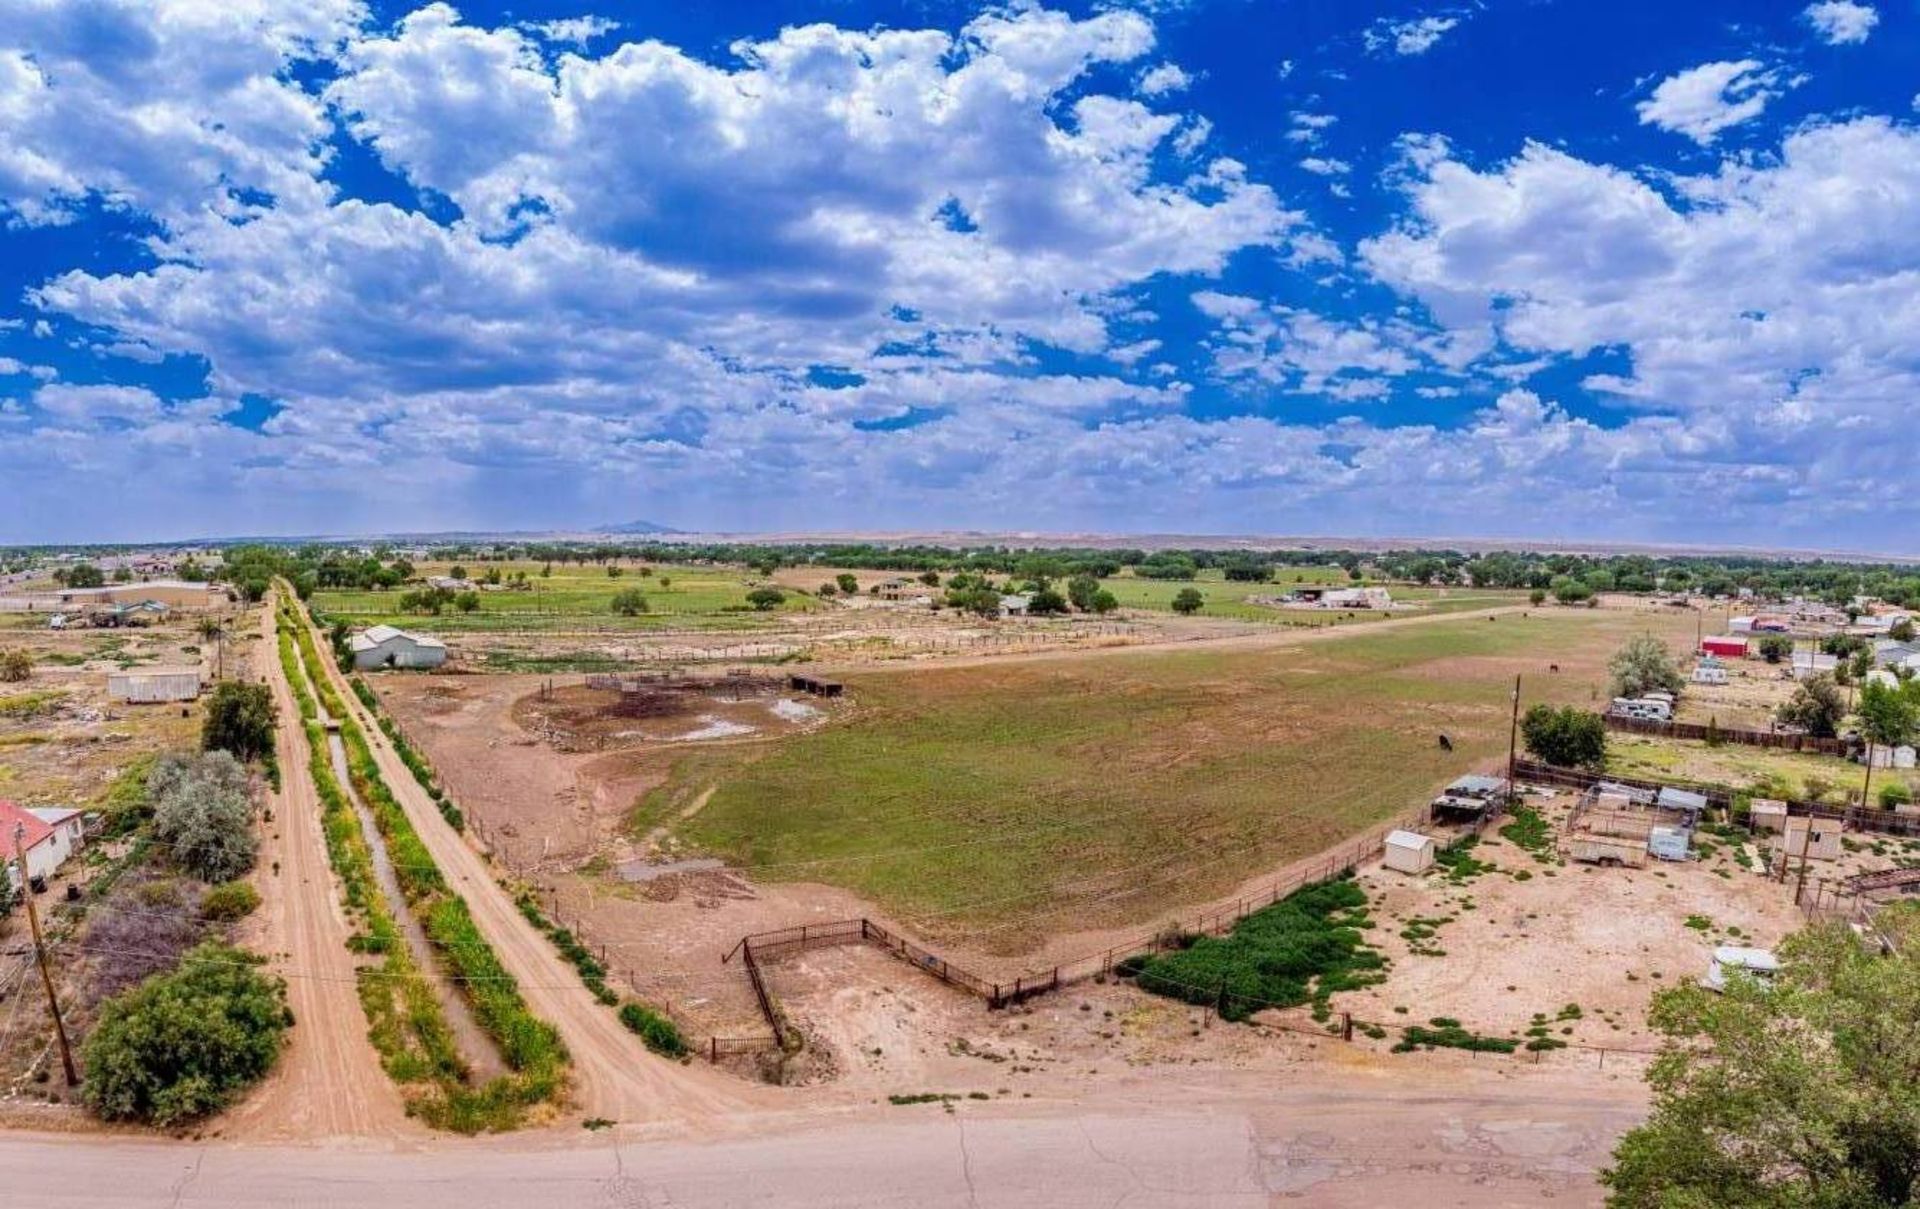 Prime Investment Opportunity: 10 Lots in Booming Valencia County, NM! BIDDING IS PER LOT! - Image 4 of 10